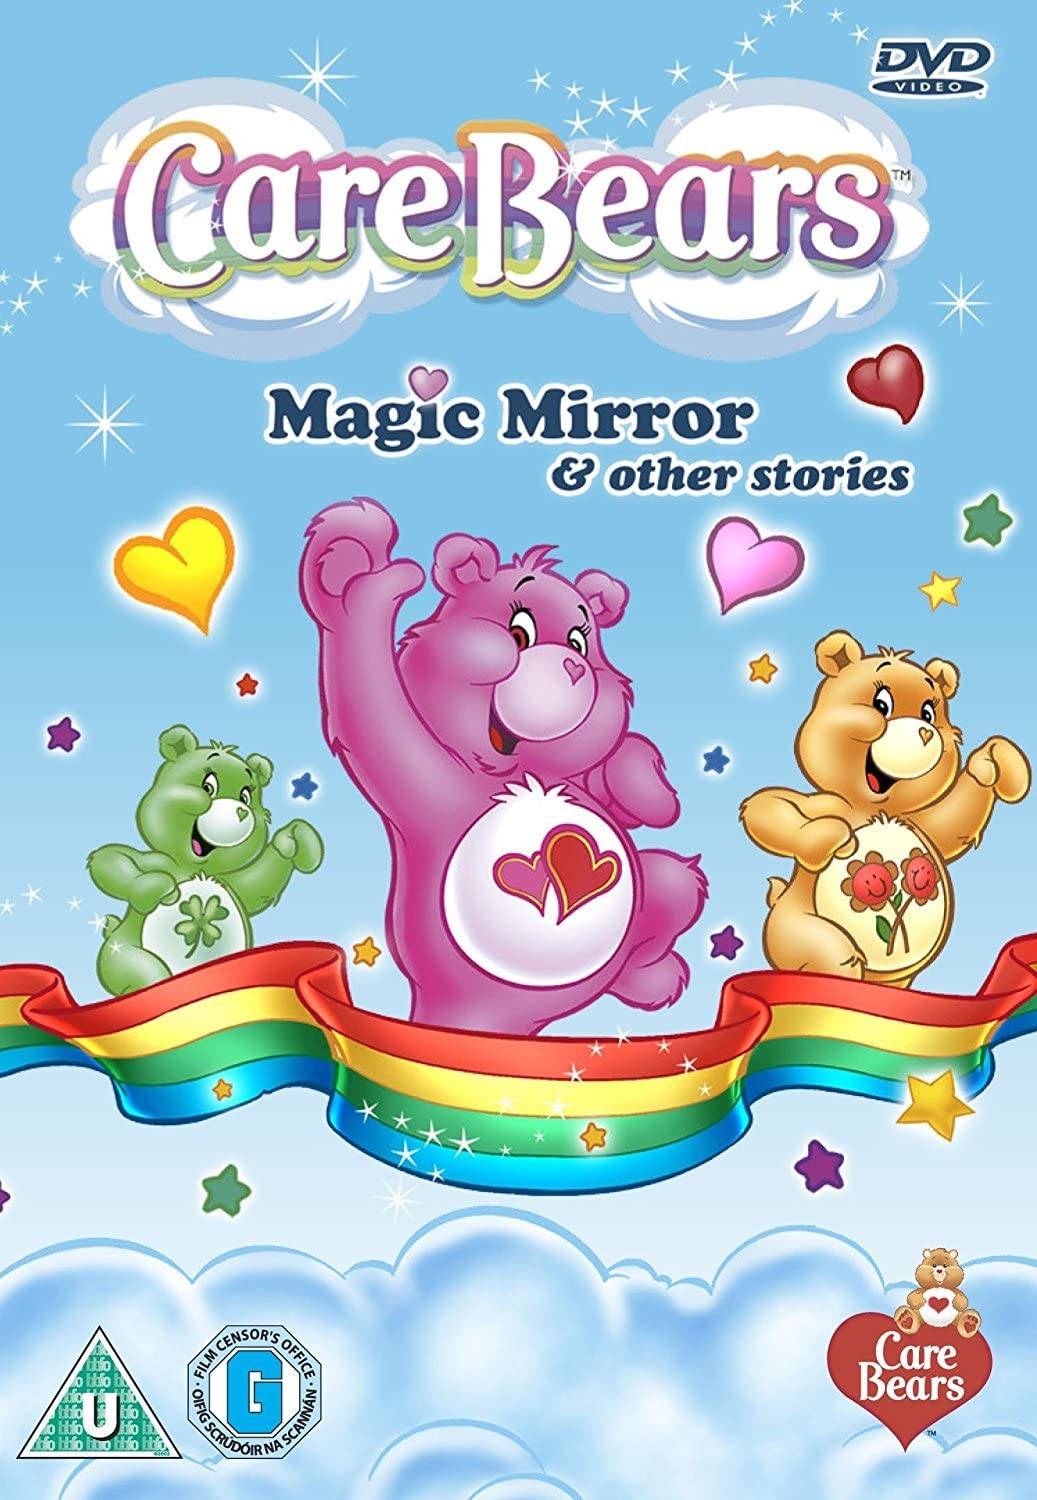 Care Bears Magic Mirror and other stories - Animation [DVD]